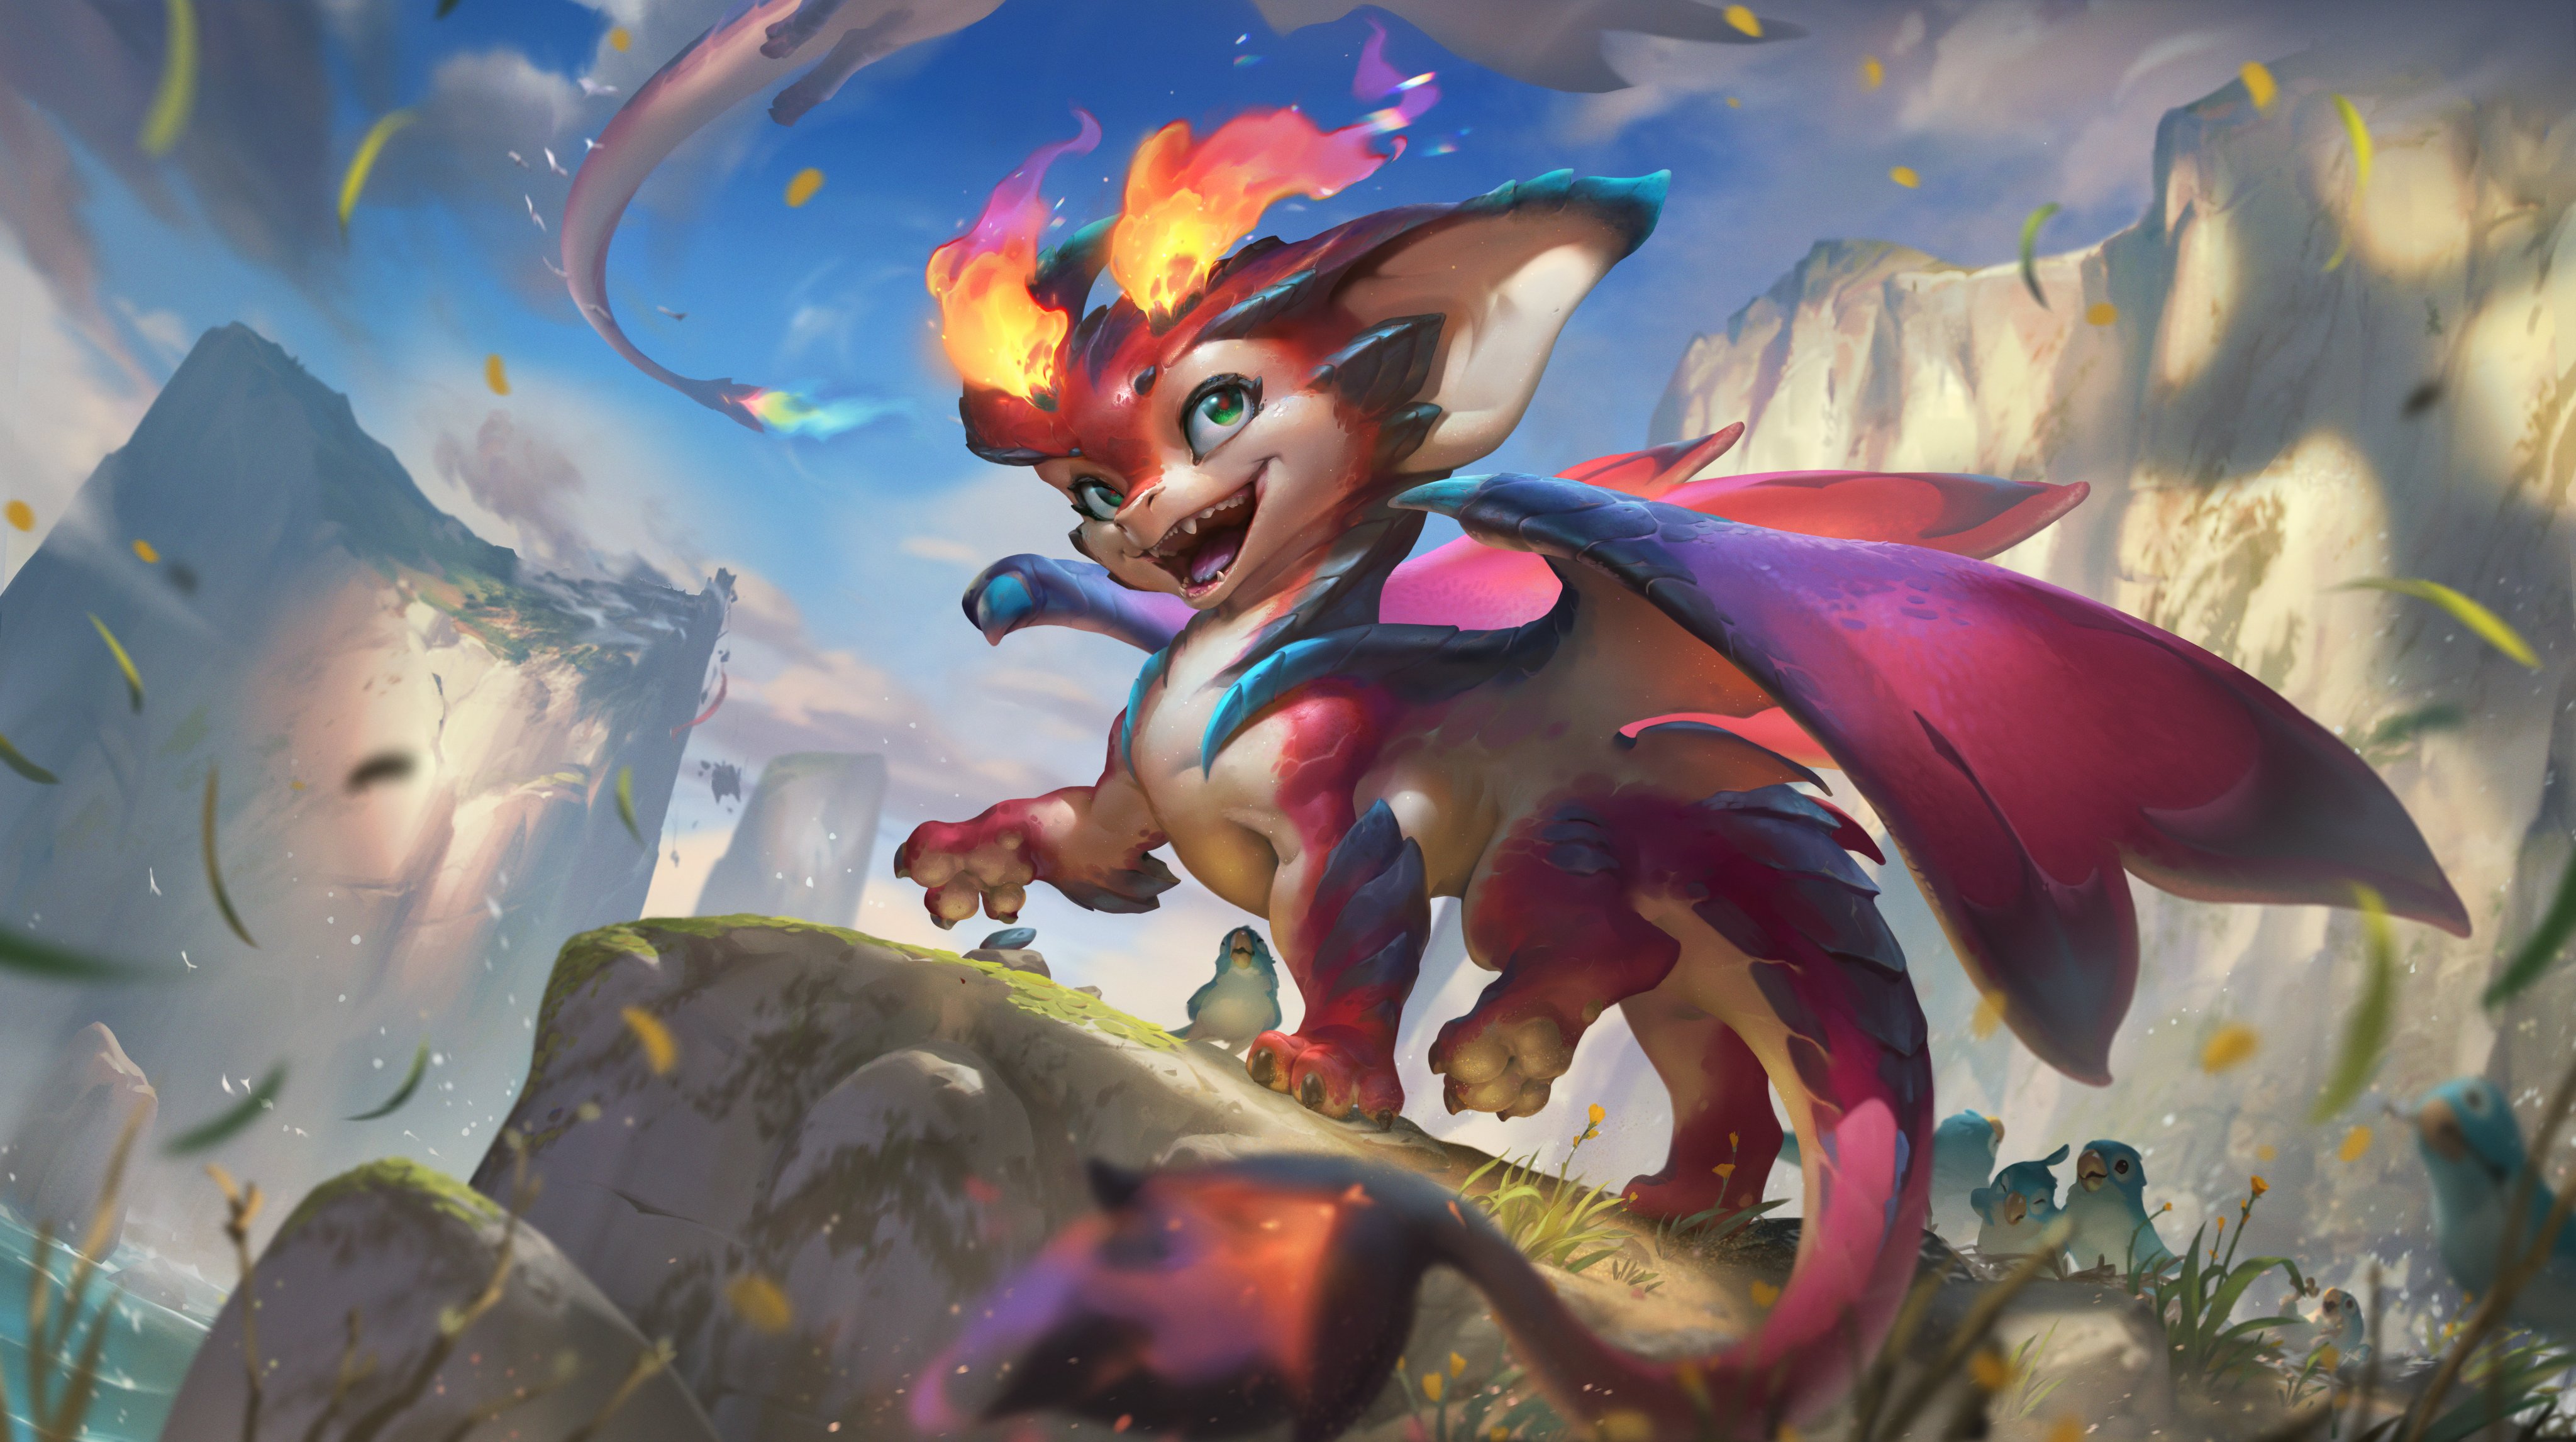 Smolder, the baby dragon champion coming to League of Legions, depicted in his splash art. He’s a small red creature with big ears, twin plumes of flame emerging from his forehead, big eyes, and a plucky demeanor.